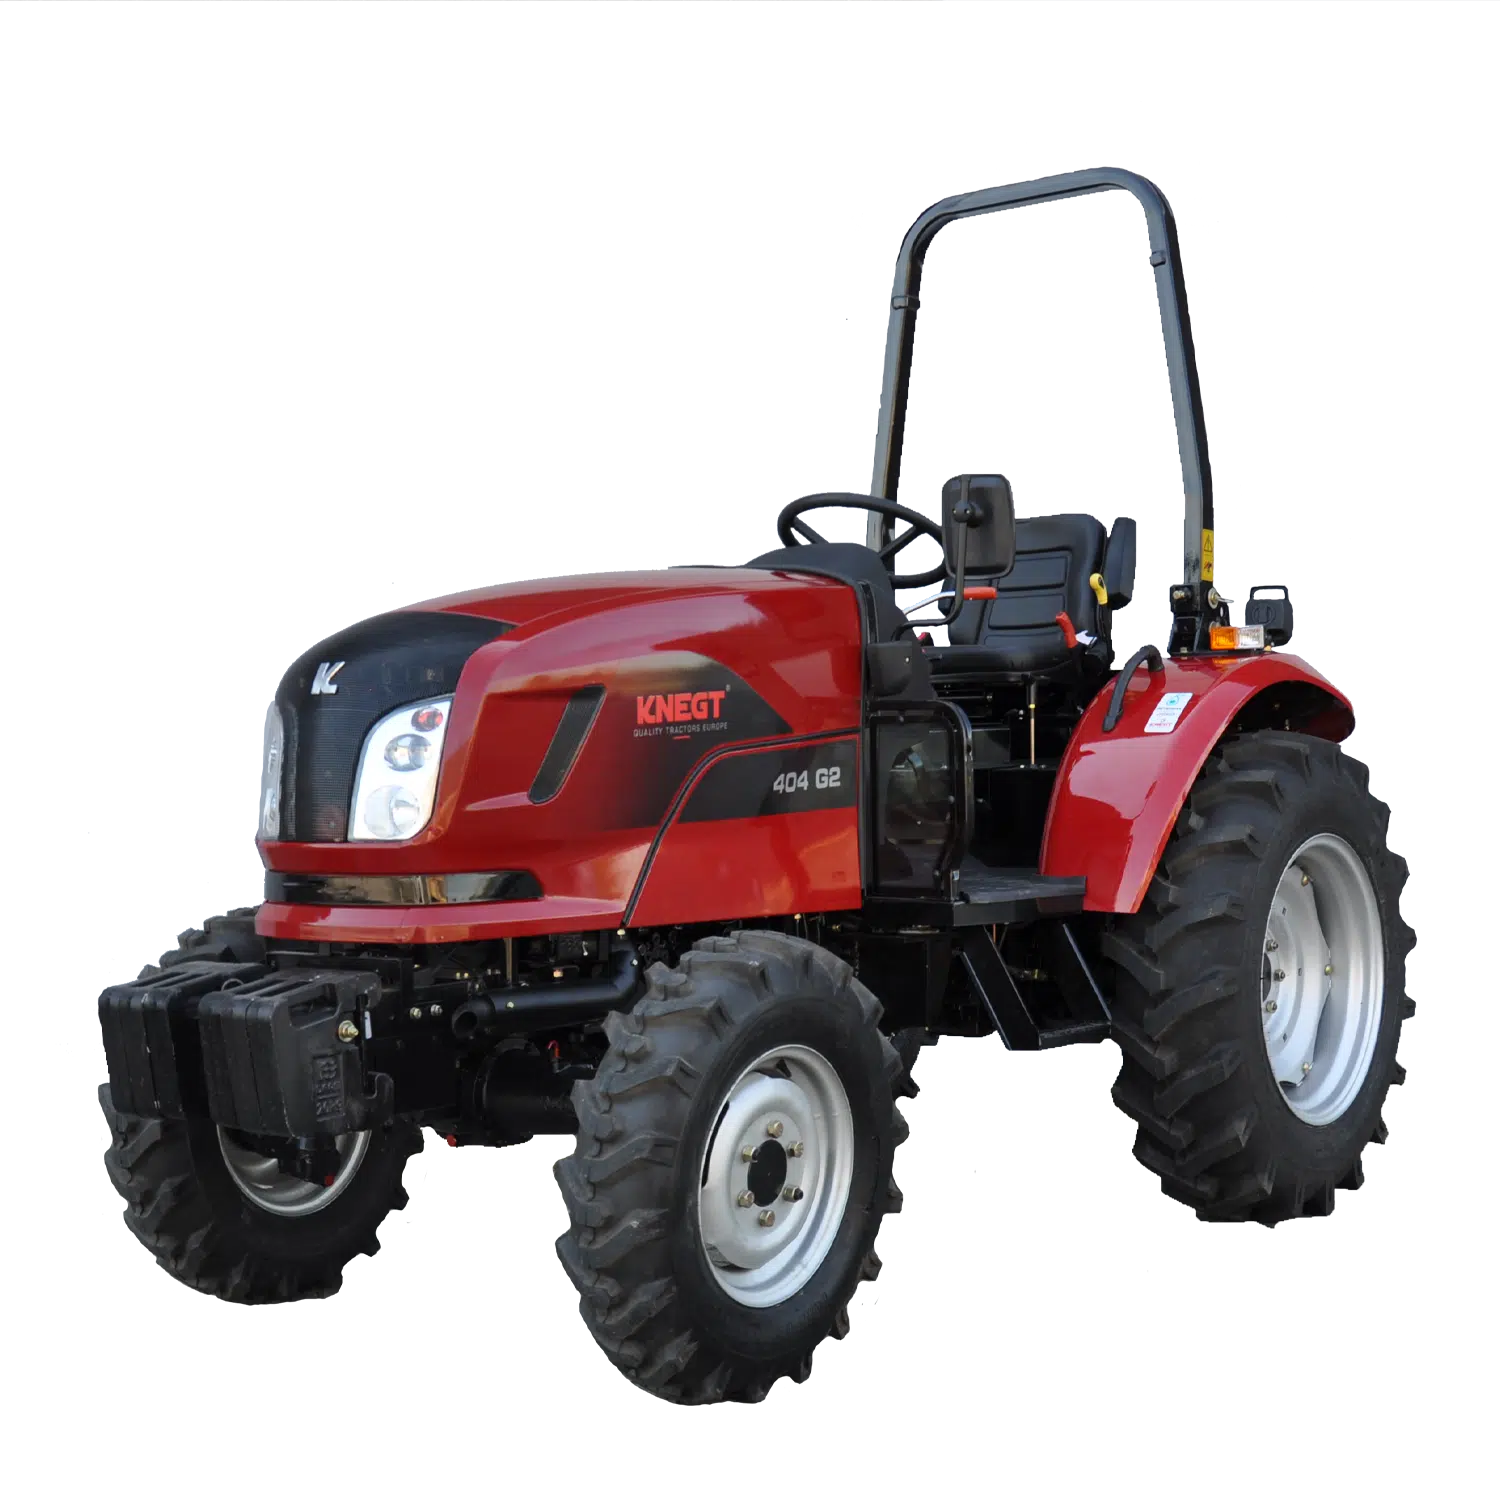 knegt_compact_tractor_productfoto_404g2_voorkant